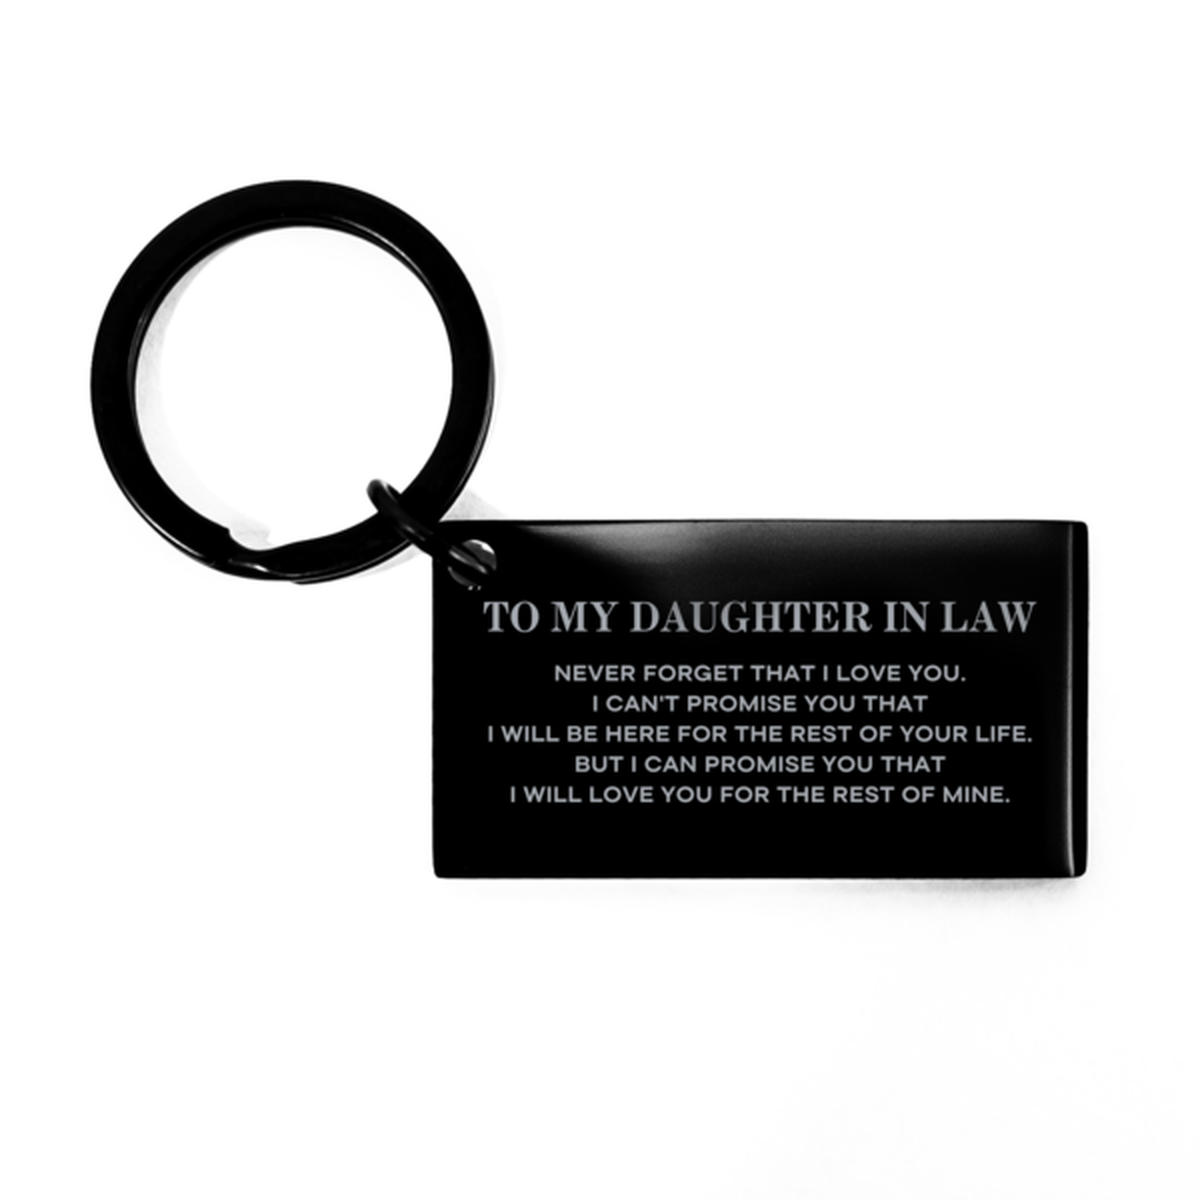 To My Daughter In Law Gifts, I will love you for the rest of mine, Love Daughter In Law Keychain, Birthday Christmas Unique Keychain For Daughter In Law